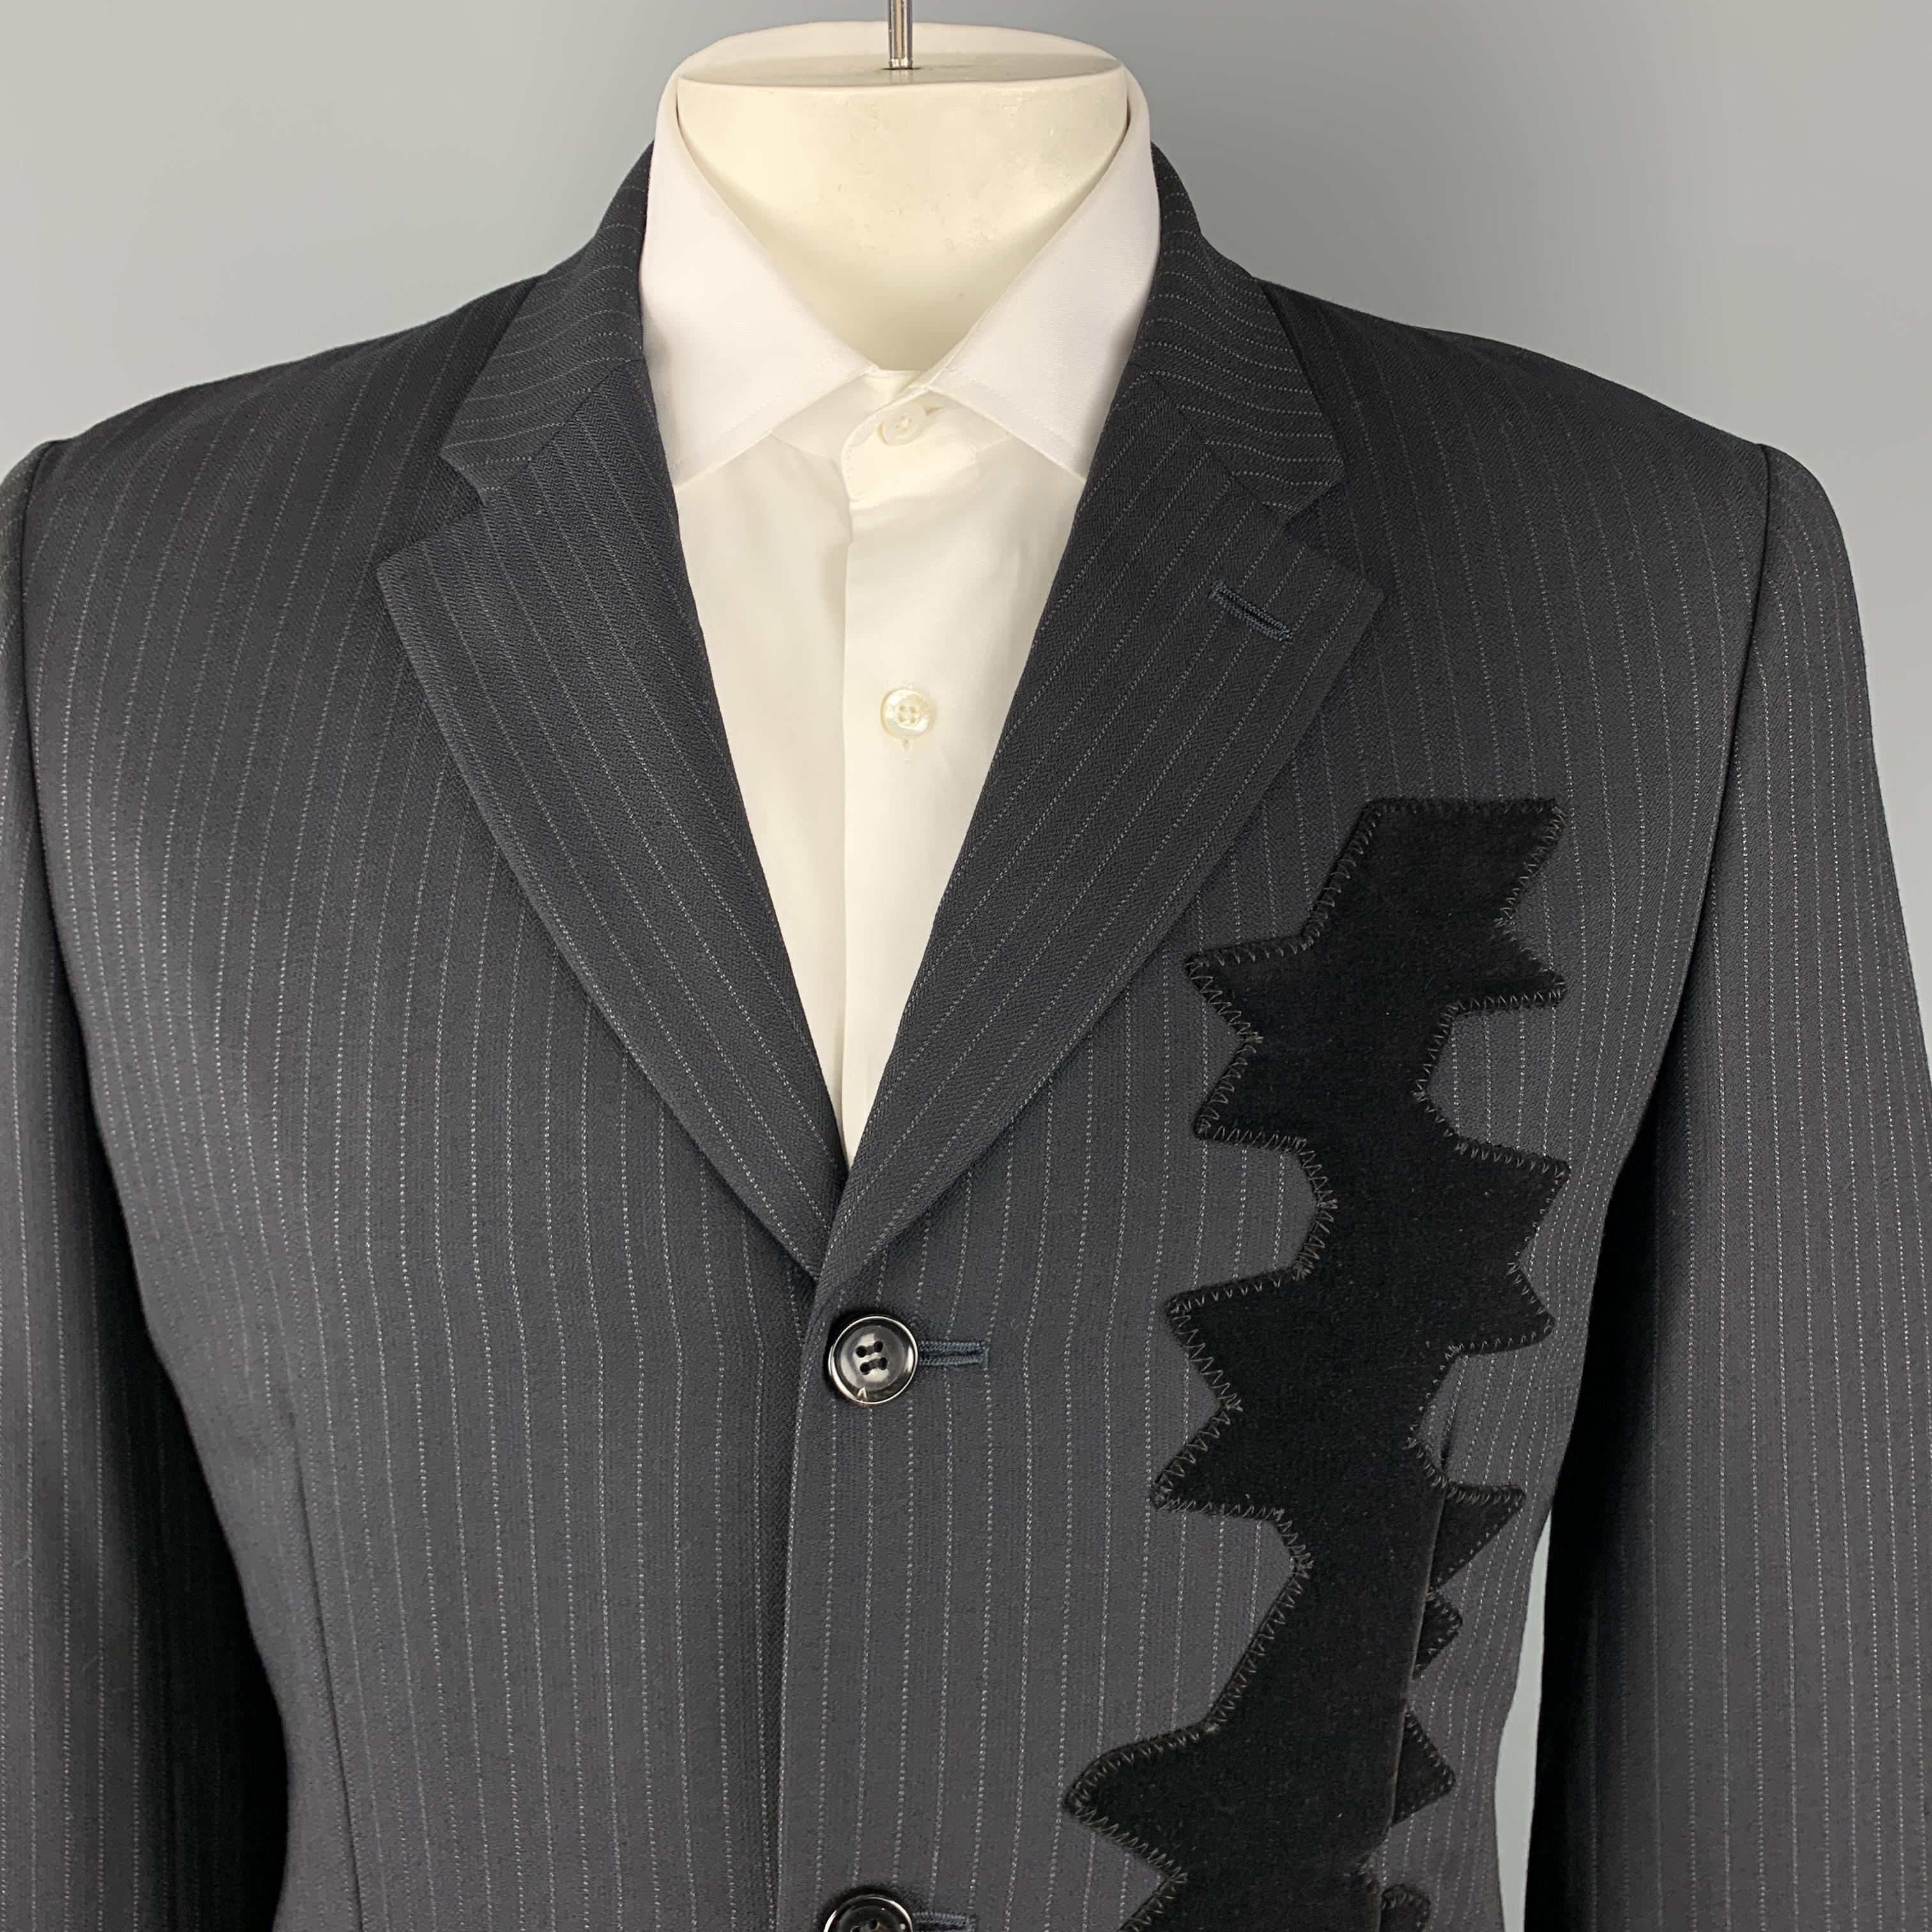 COMME des GARCONS HOMME PLUS sport coat comes in black pinstriped wool with a notch lapel, single breasted, three button front, and velvet applique patch. Made in Japan.

Excellent Pre-Owned Condition.
Marked: L AD 2006

Measurements:

Shoulder: 18